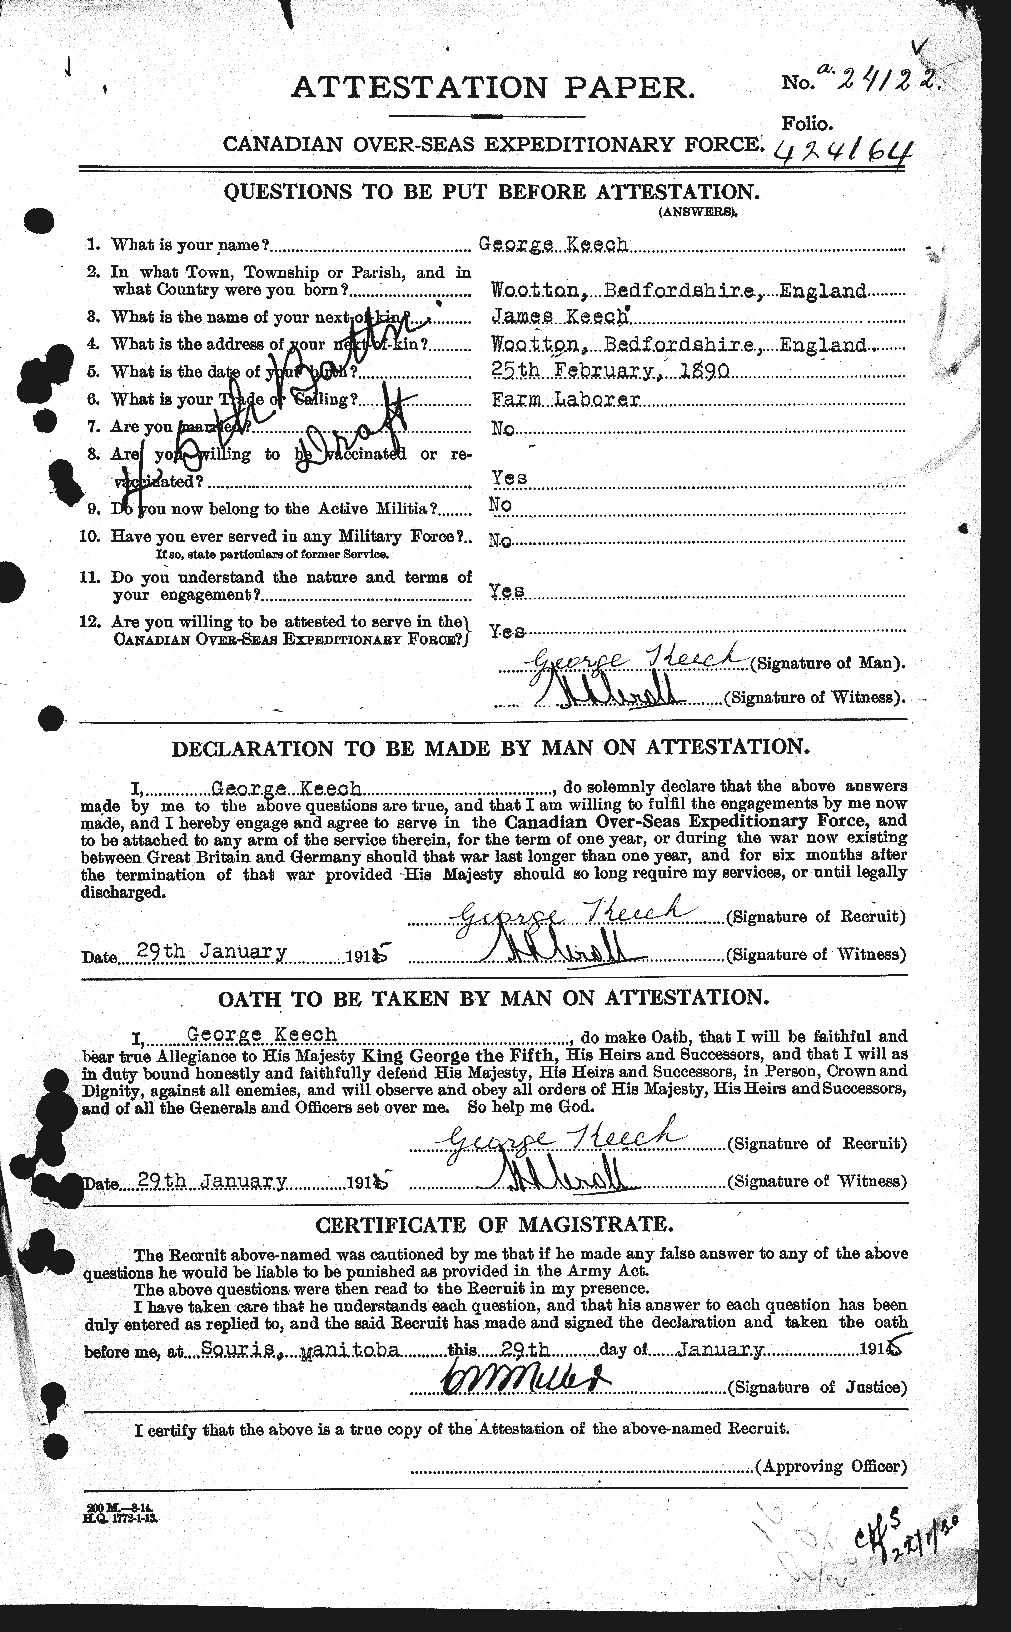 Personnel Records of the First World War - CEF 427669a